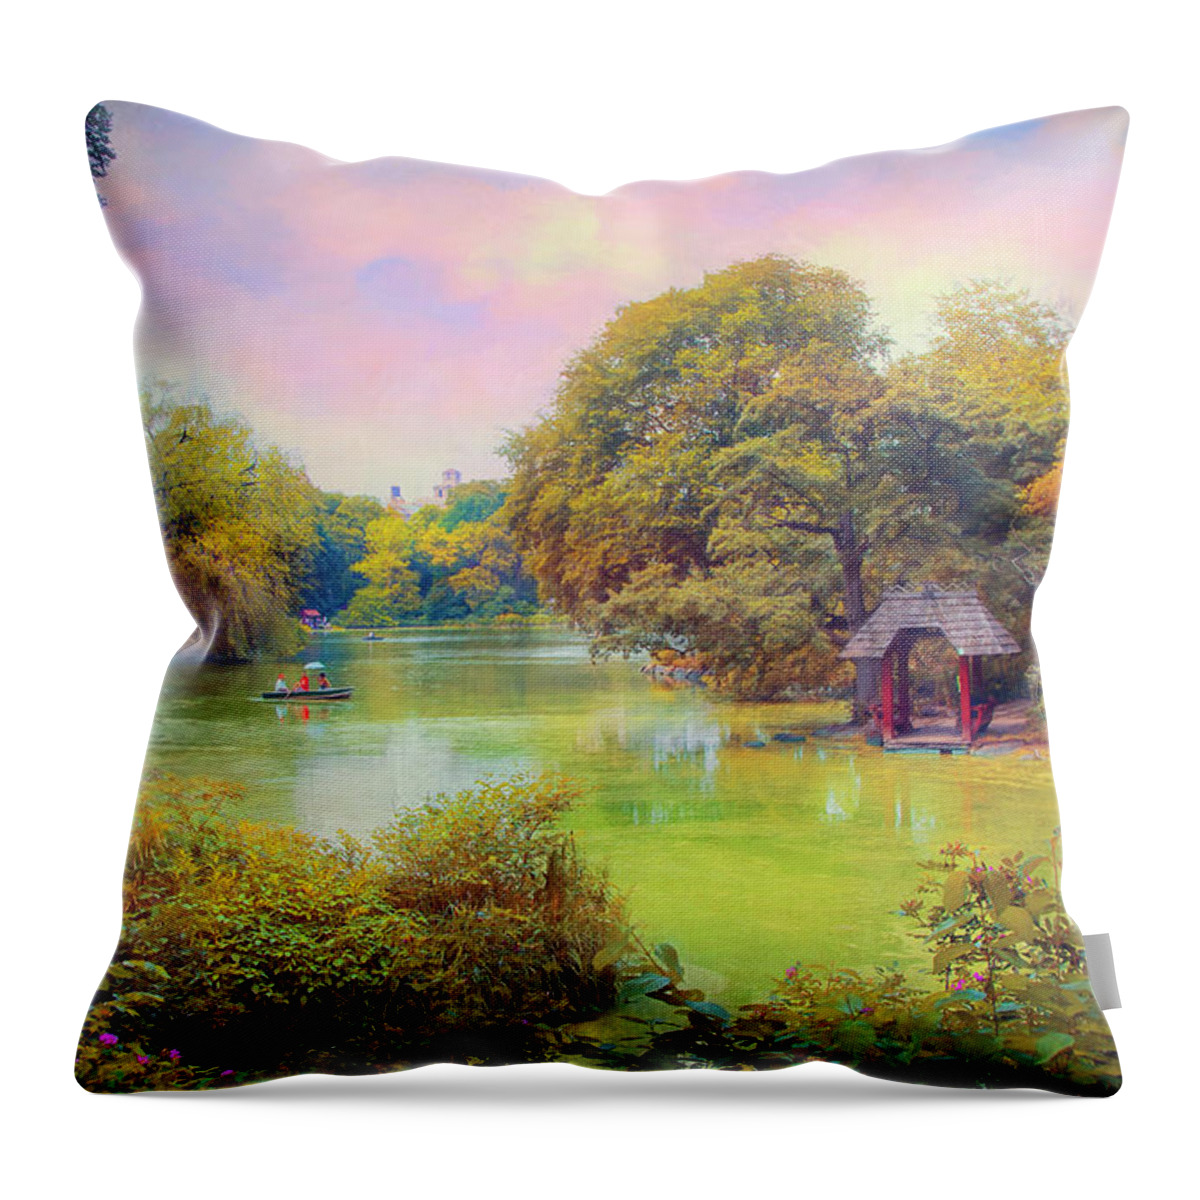 Lake Throw Pillow featuring the photograph The Lake by John Rivera